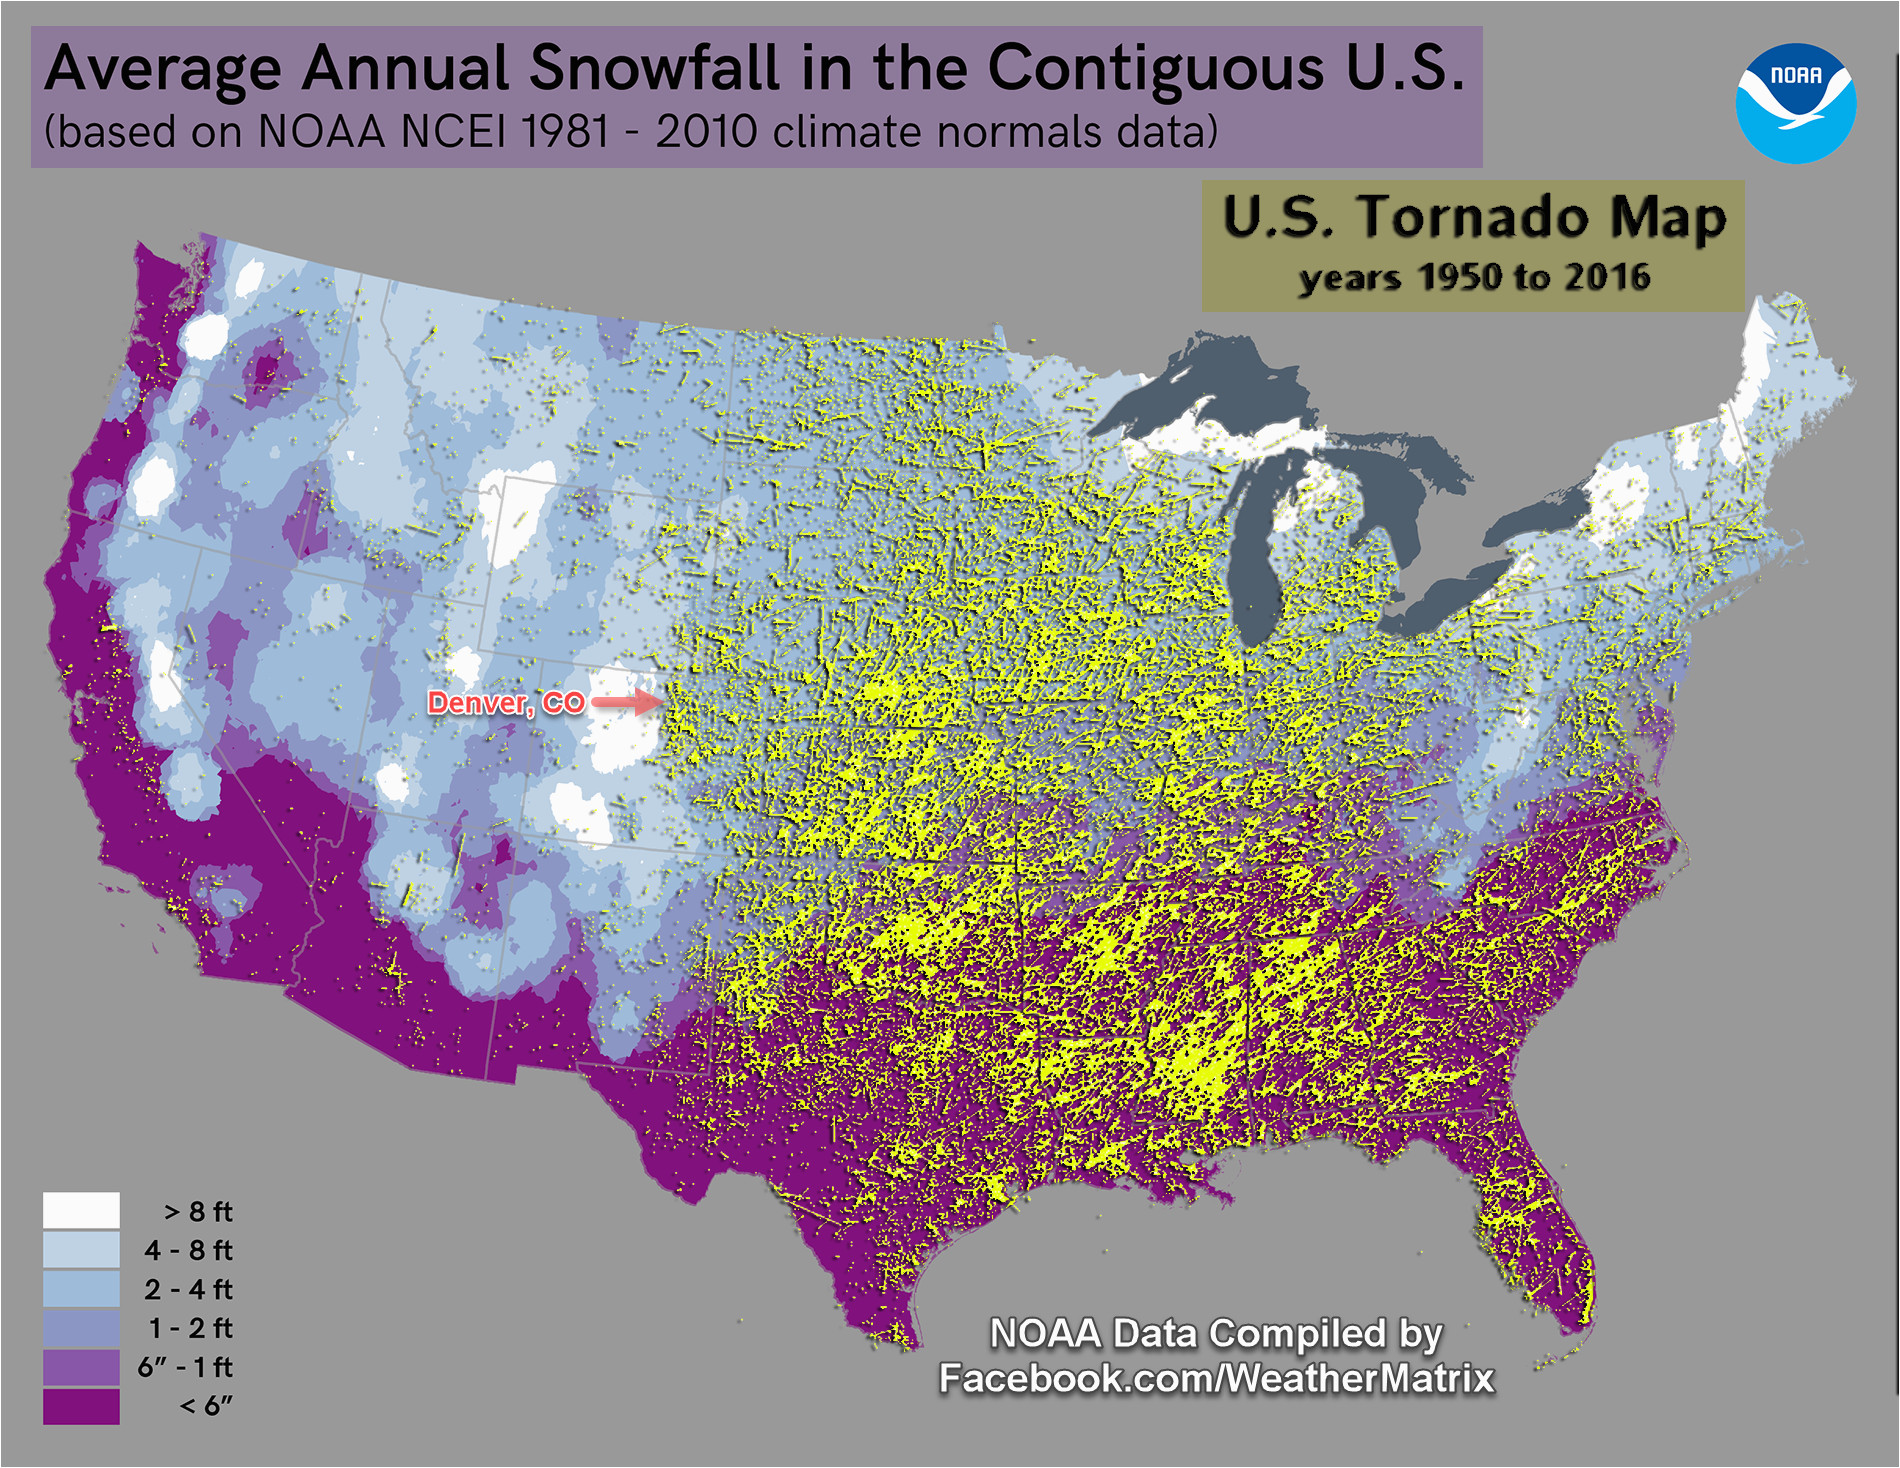 where in the u s gets both extreme snow and severe thunderstorms